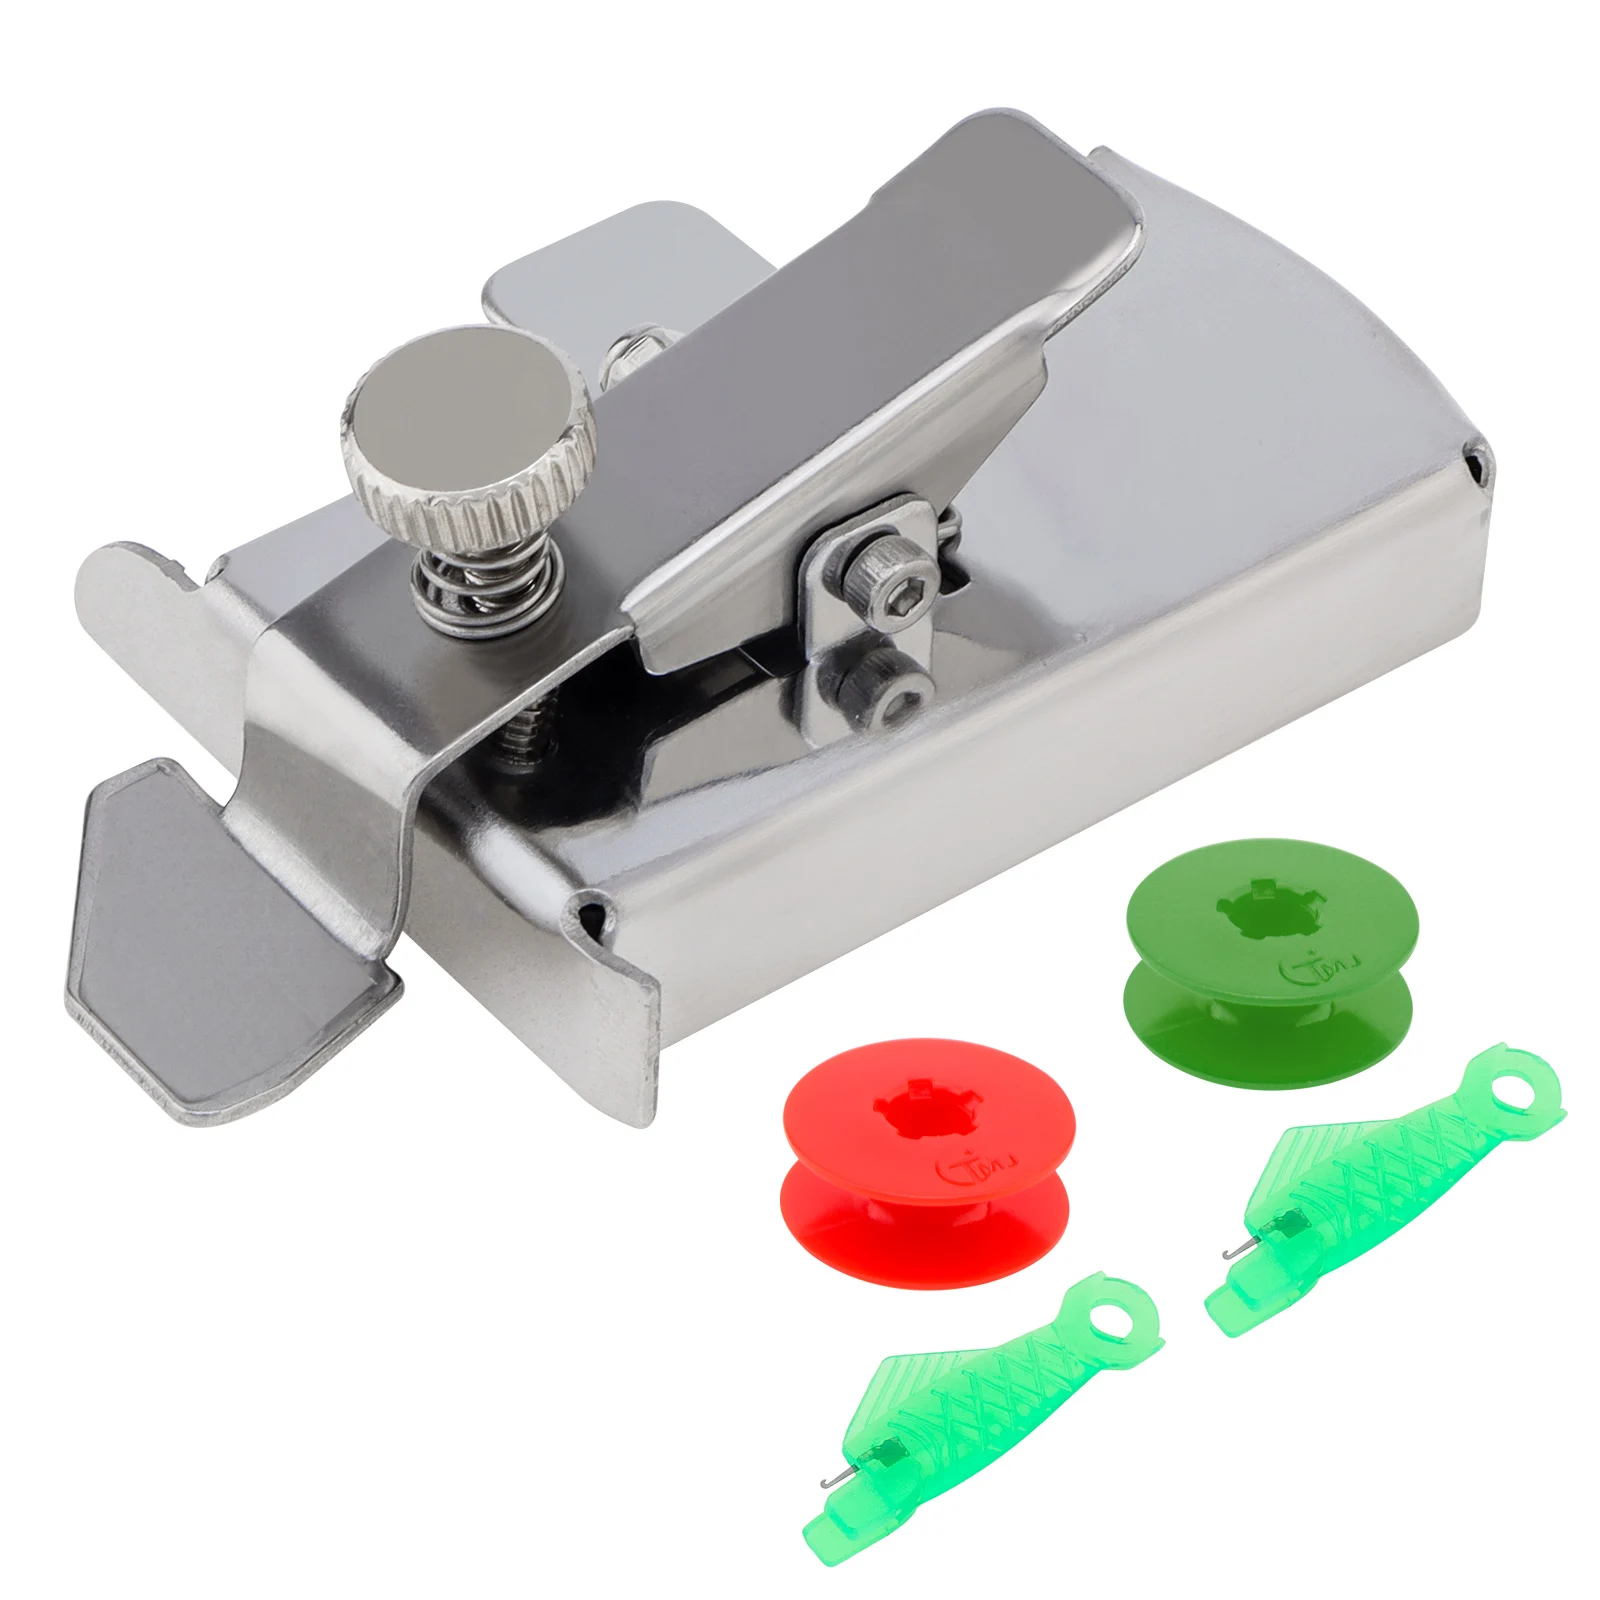 

Magnetic Sewing Guide for Walking Foot Sewing Machine Sewing Supplies Accessories with Clip 2pcs Plastics Sewing Bobbins